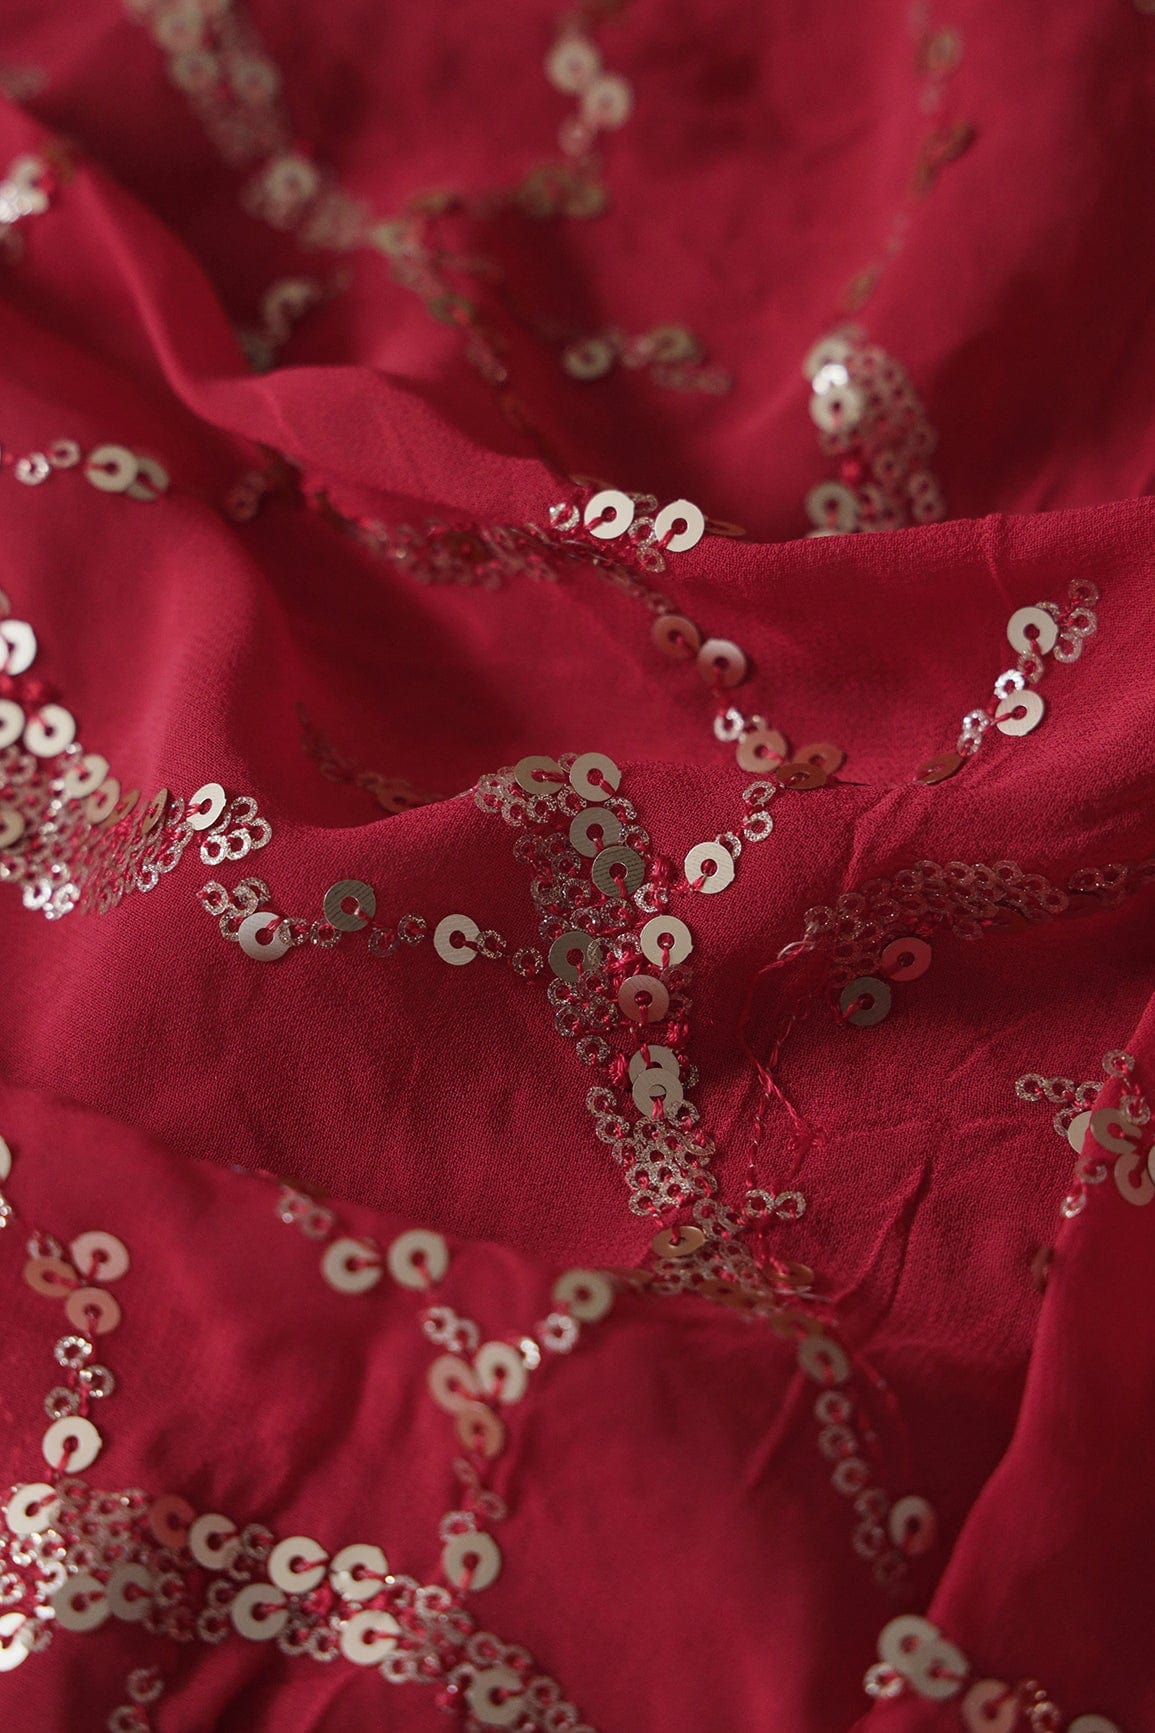 doeraa Embroidery Fabrics 1 Meter Cut Piece Of Gold Sequins Geometric Embroidery Work On Red Georgette Fabric